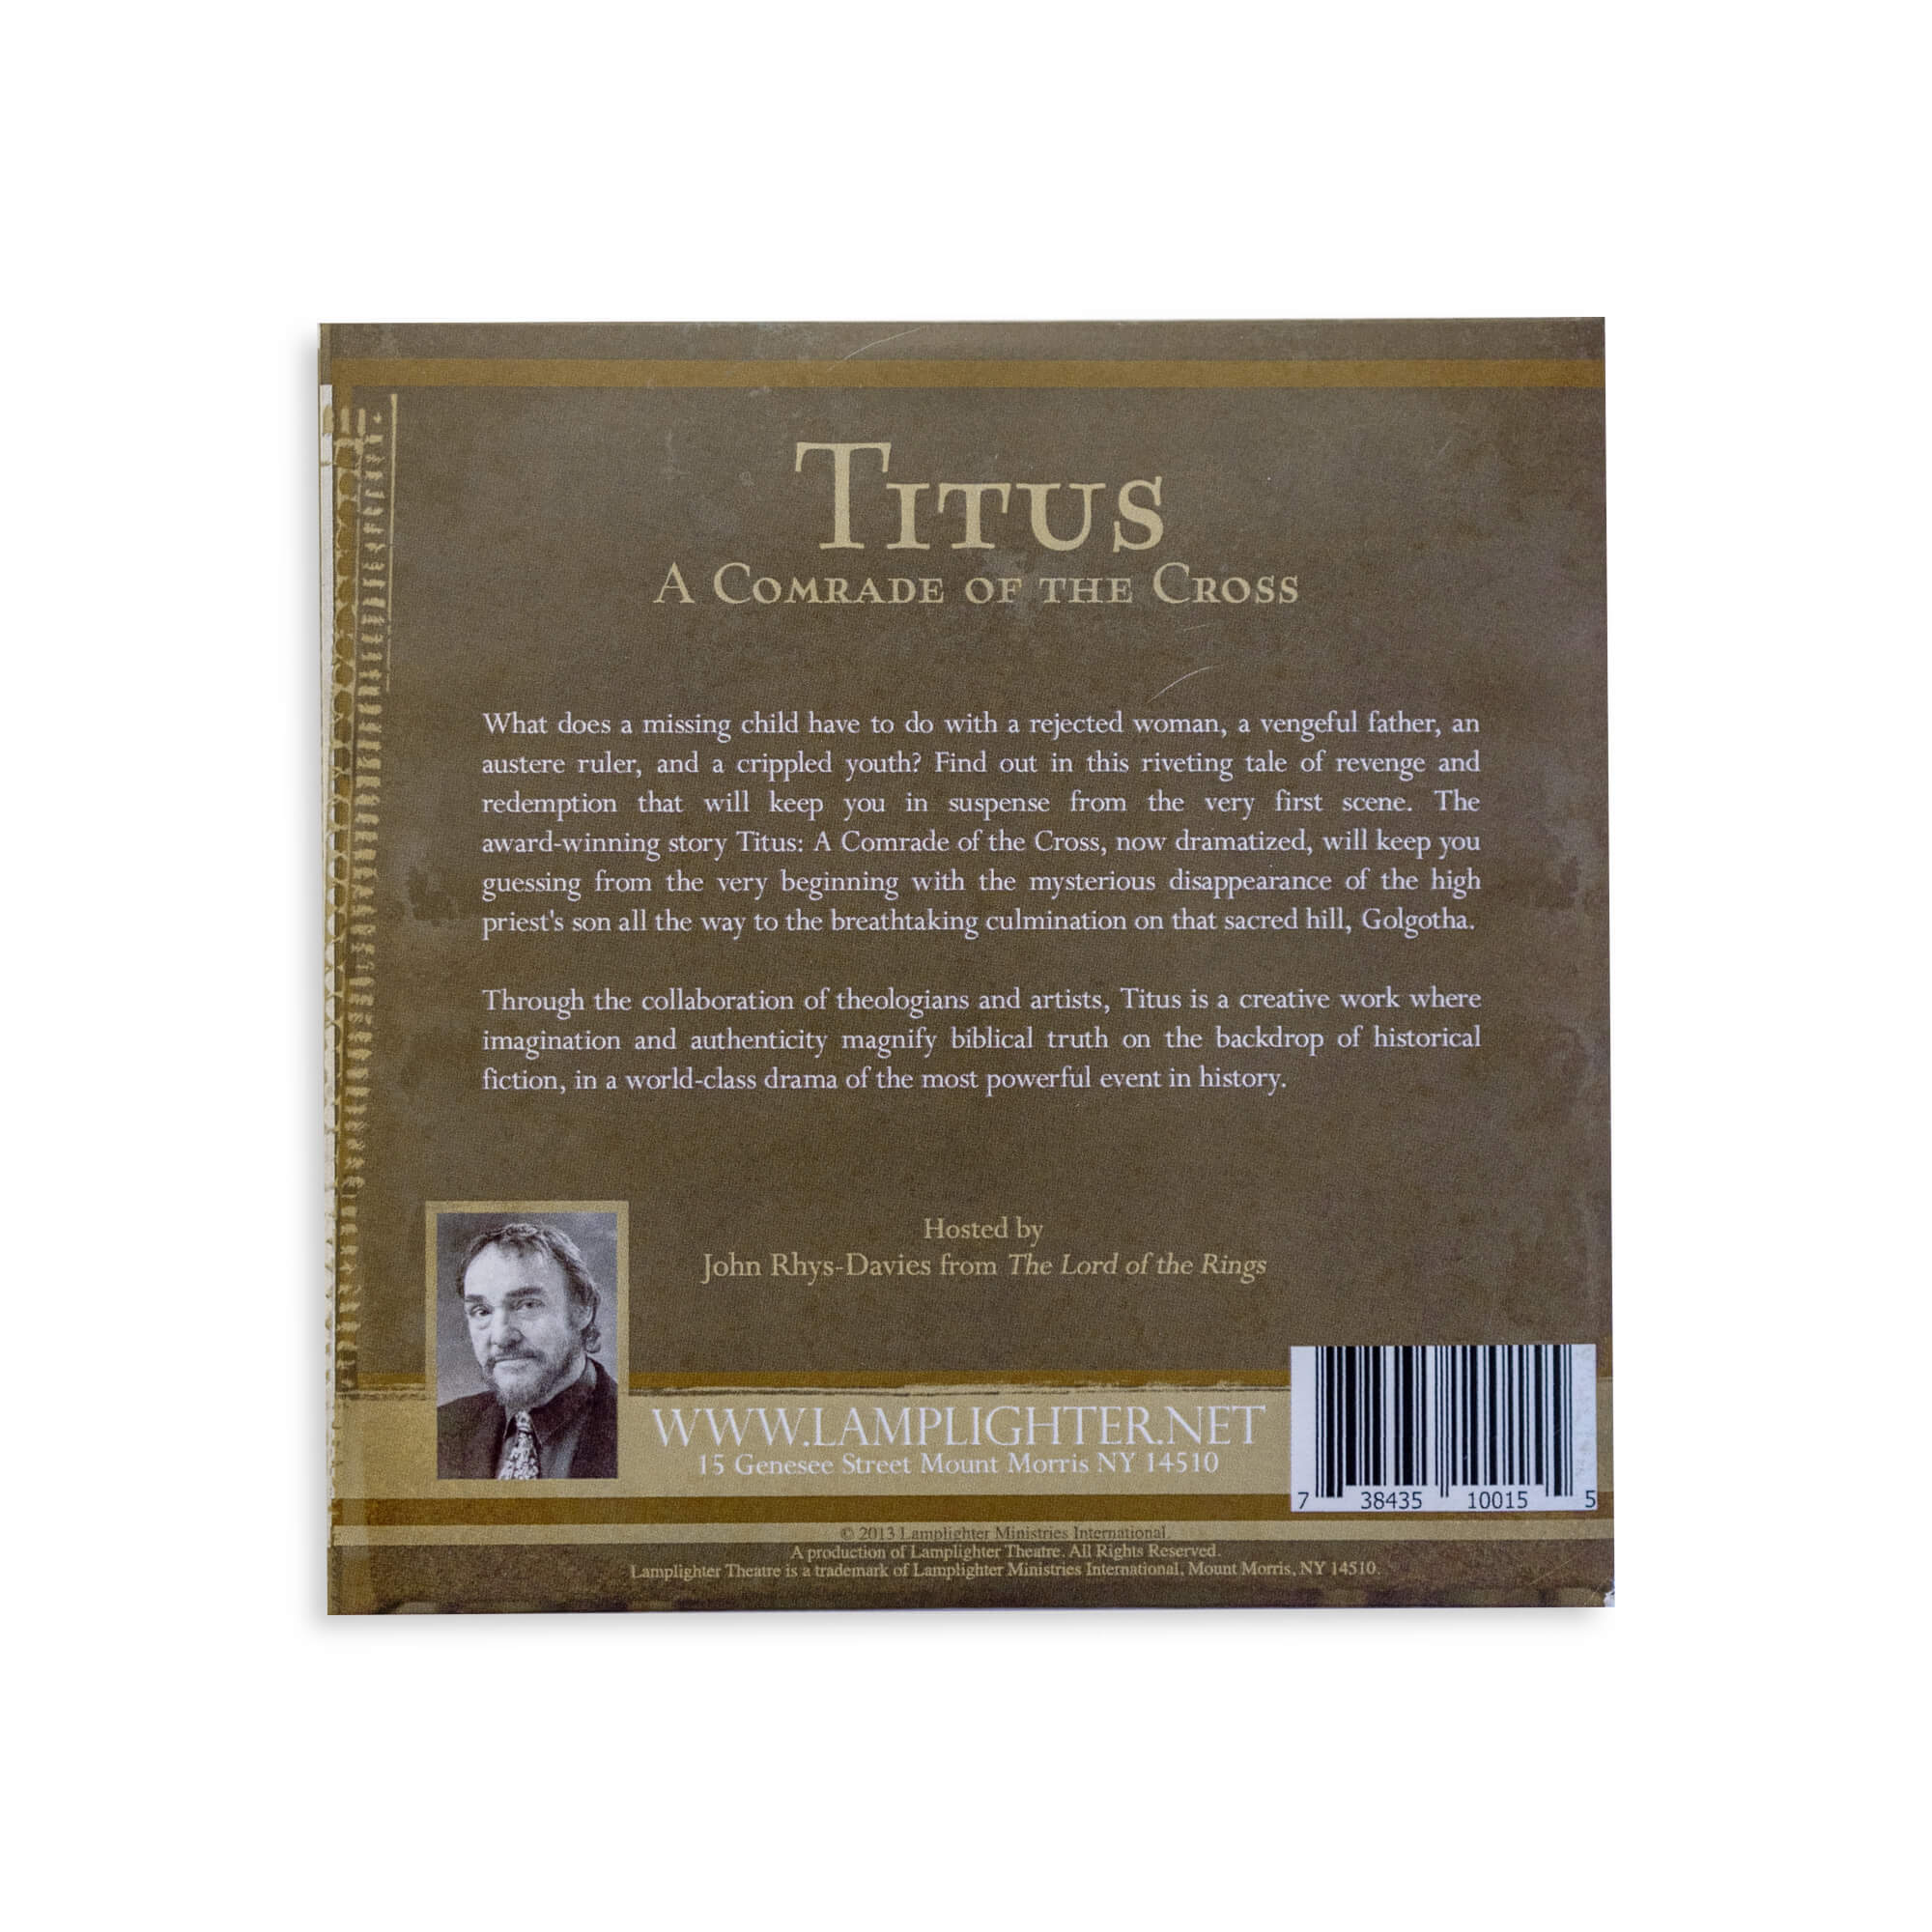 Titus, A Comrade of the Cross Audio Drama (Ages 9+)